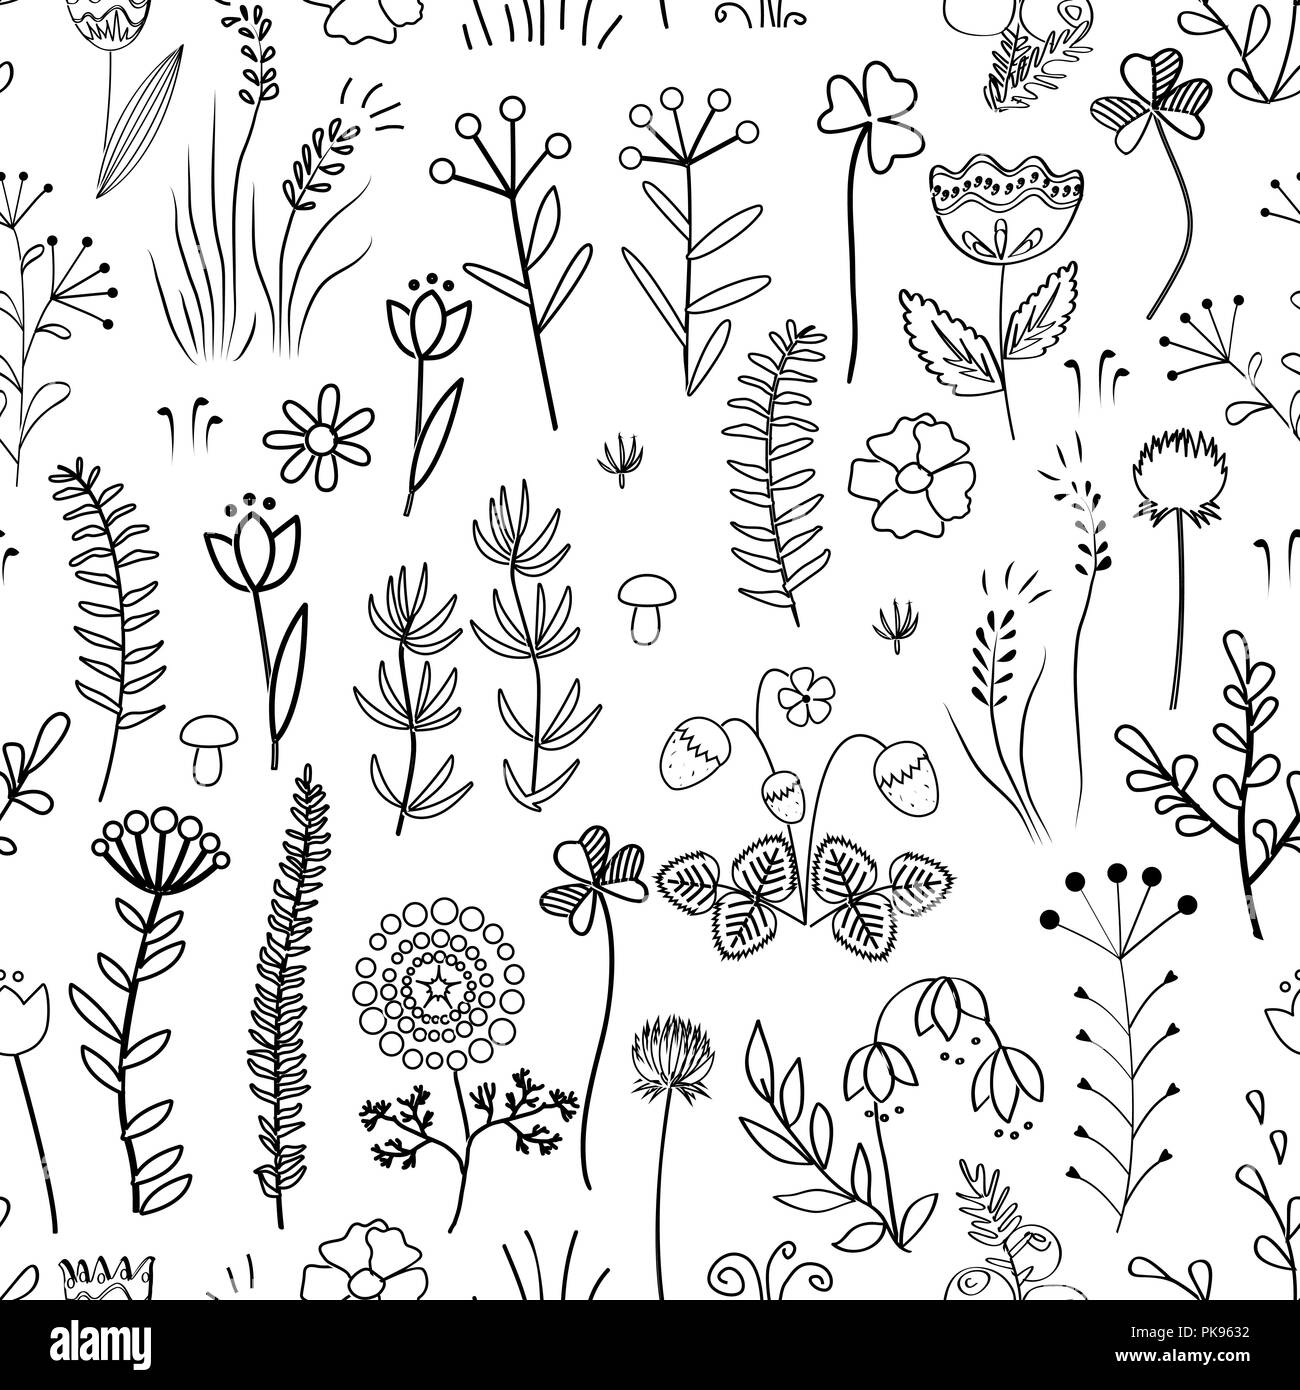 Floral Seamless Pattern Vintage Background With Different Doodle